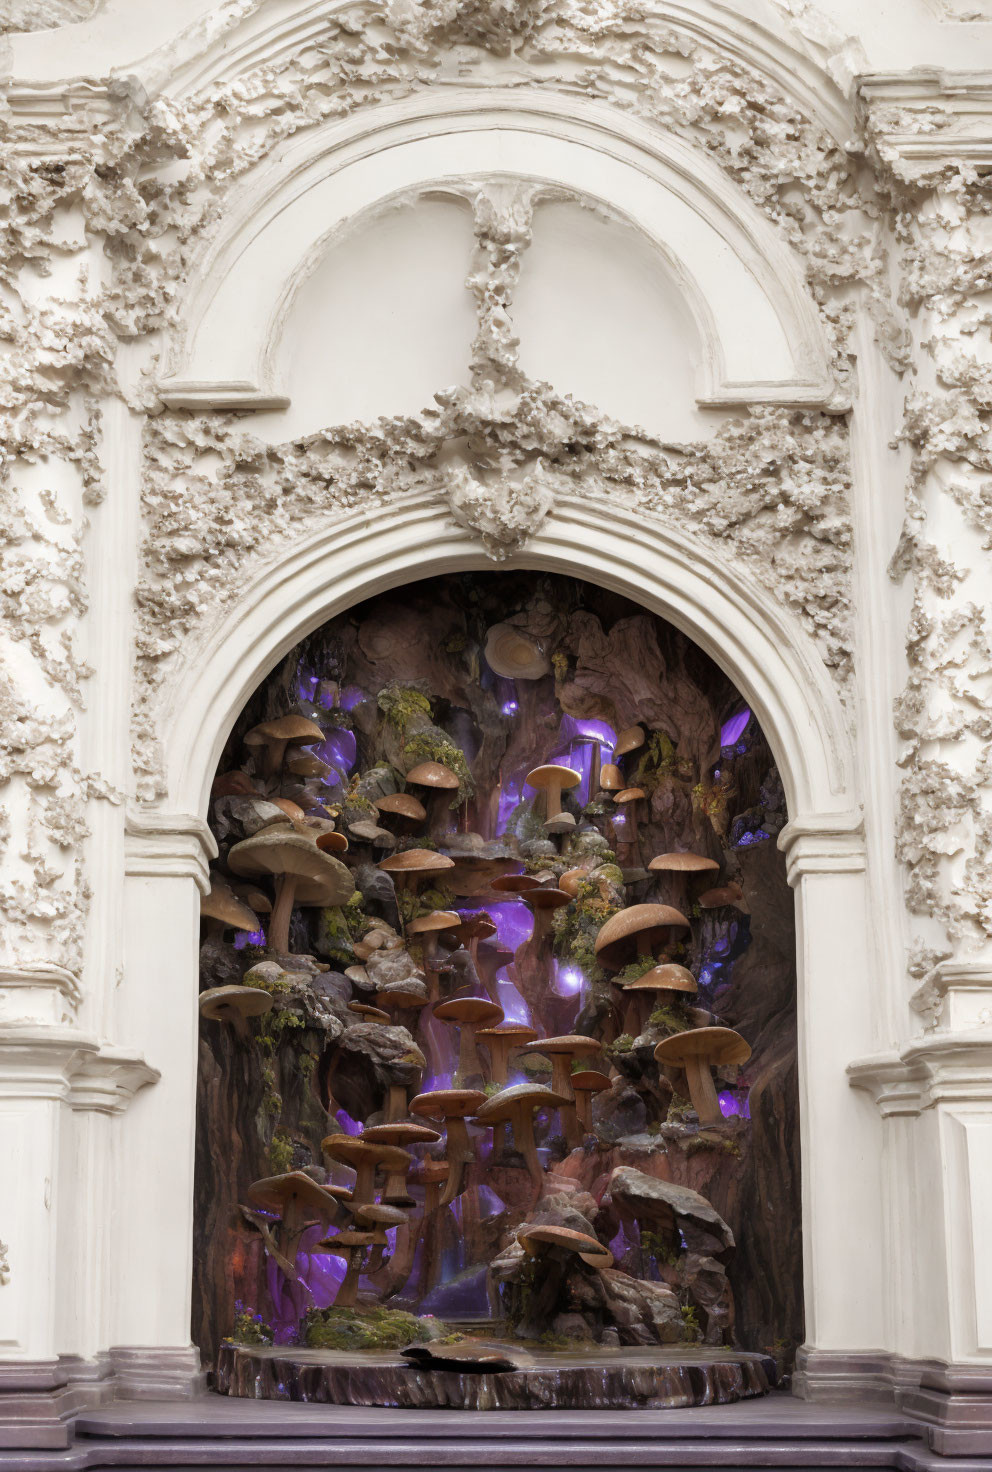 Ornate Arched Alcove with Whimsical Purple Mushroom Installation